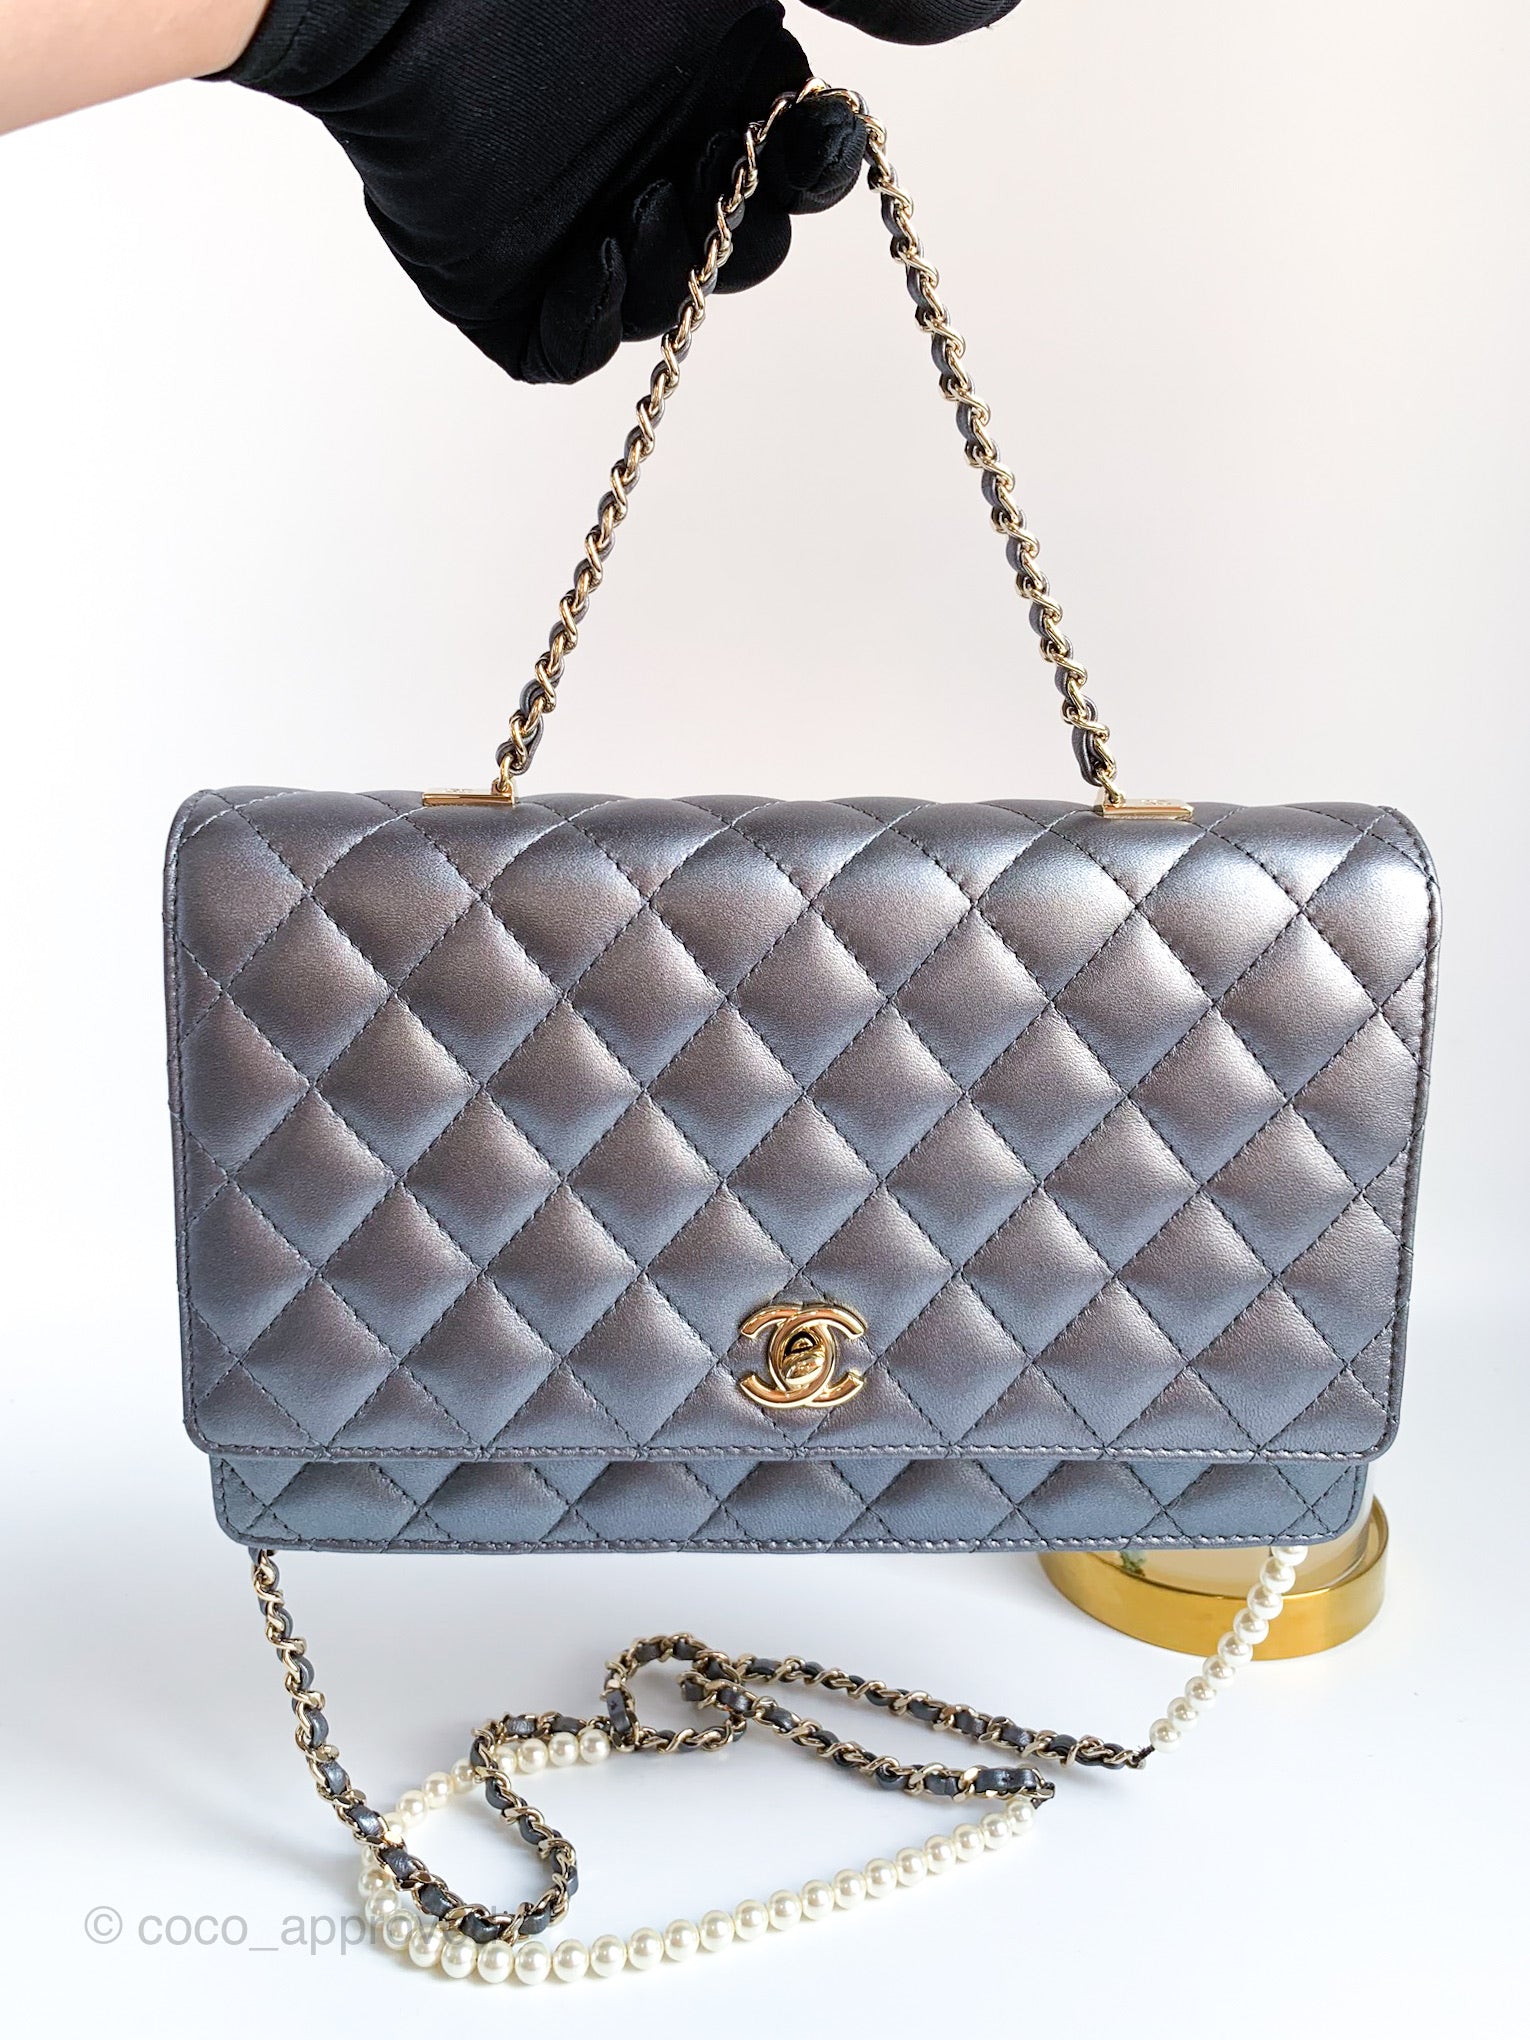 Chanel Light Gold Quilted Leather Fantasy Pearls Flap Bag - Yoogi's Closet